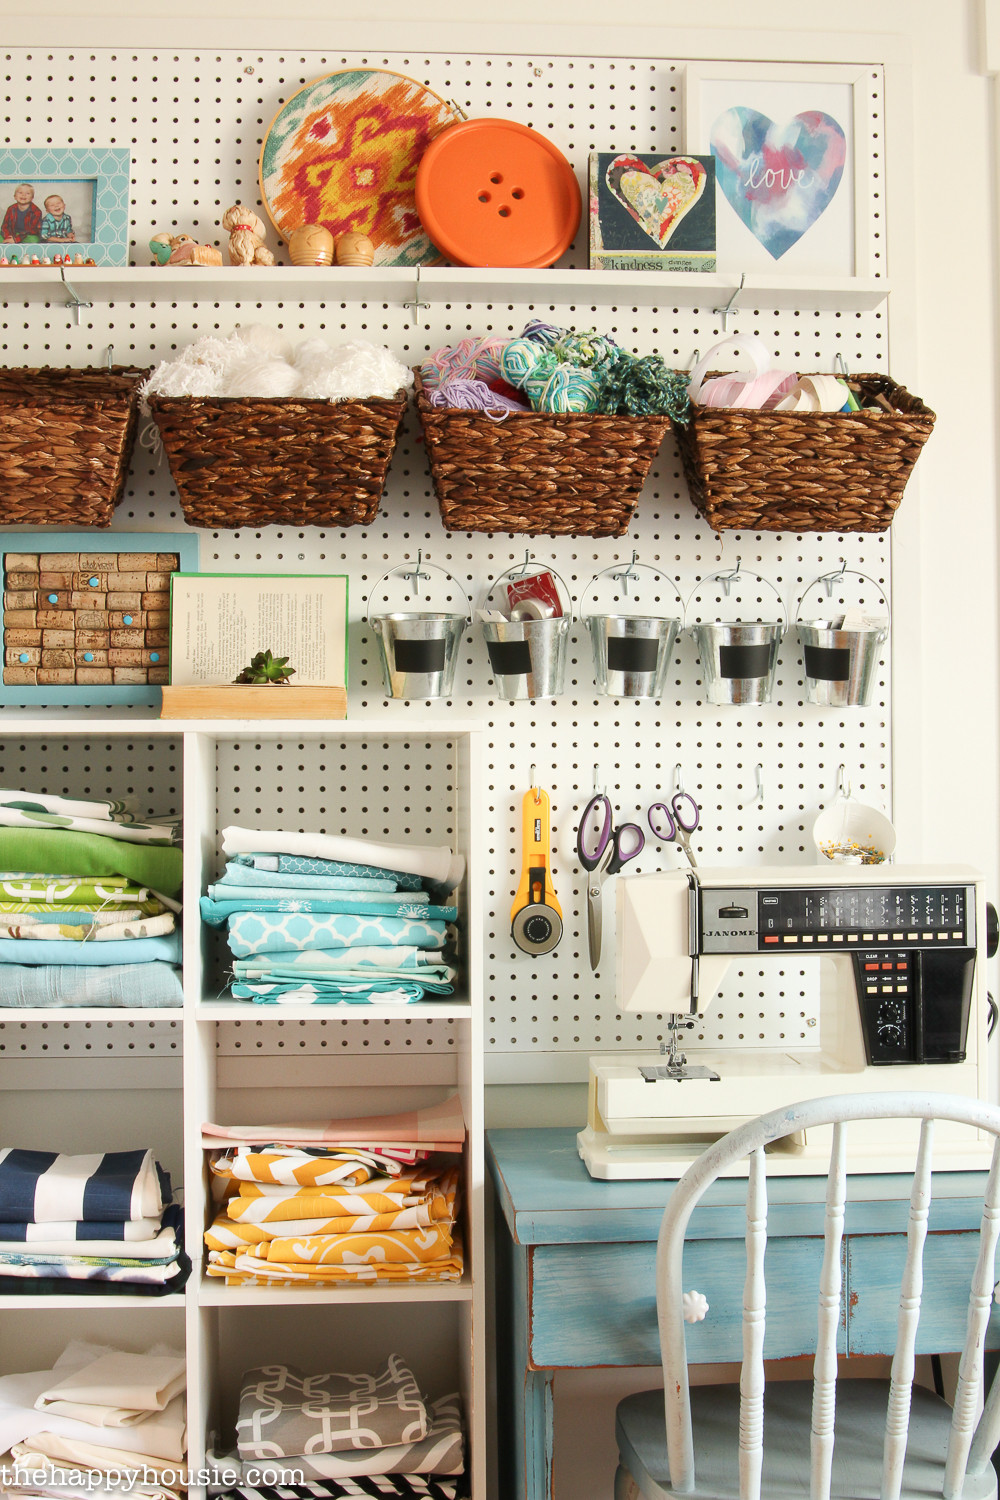 Craft Room Organizing Ideas
 How to Organize a Craft Room Work Space The Happy Housie